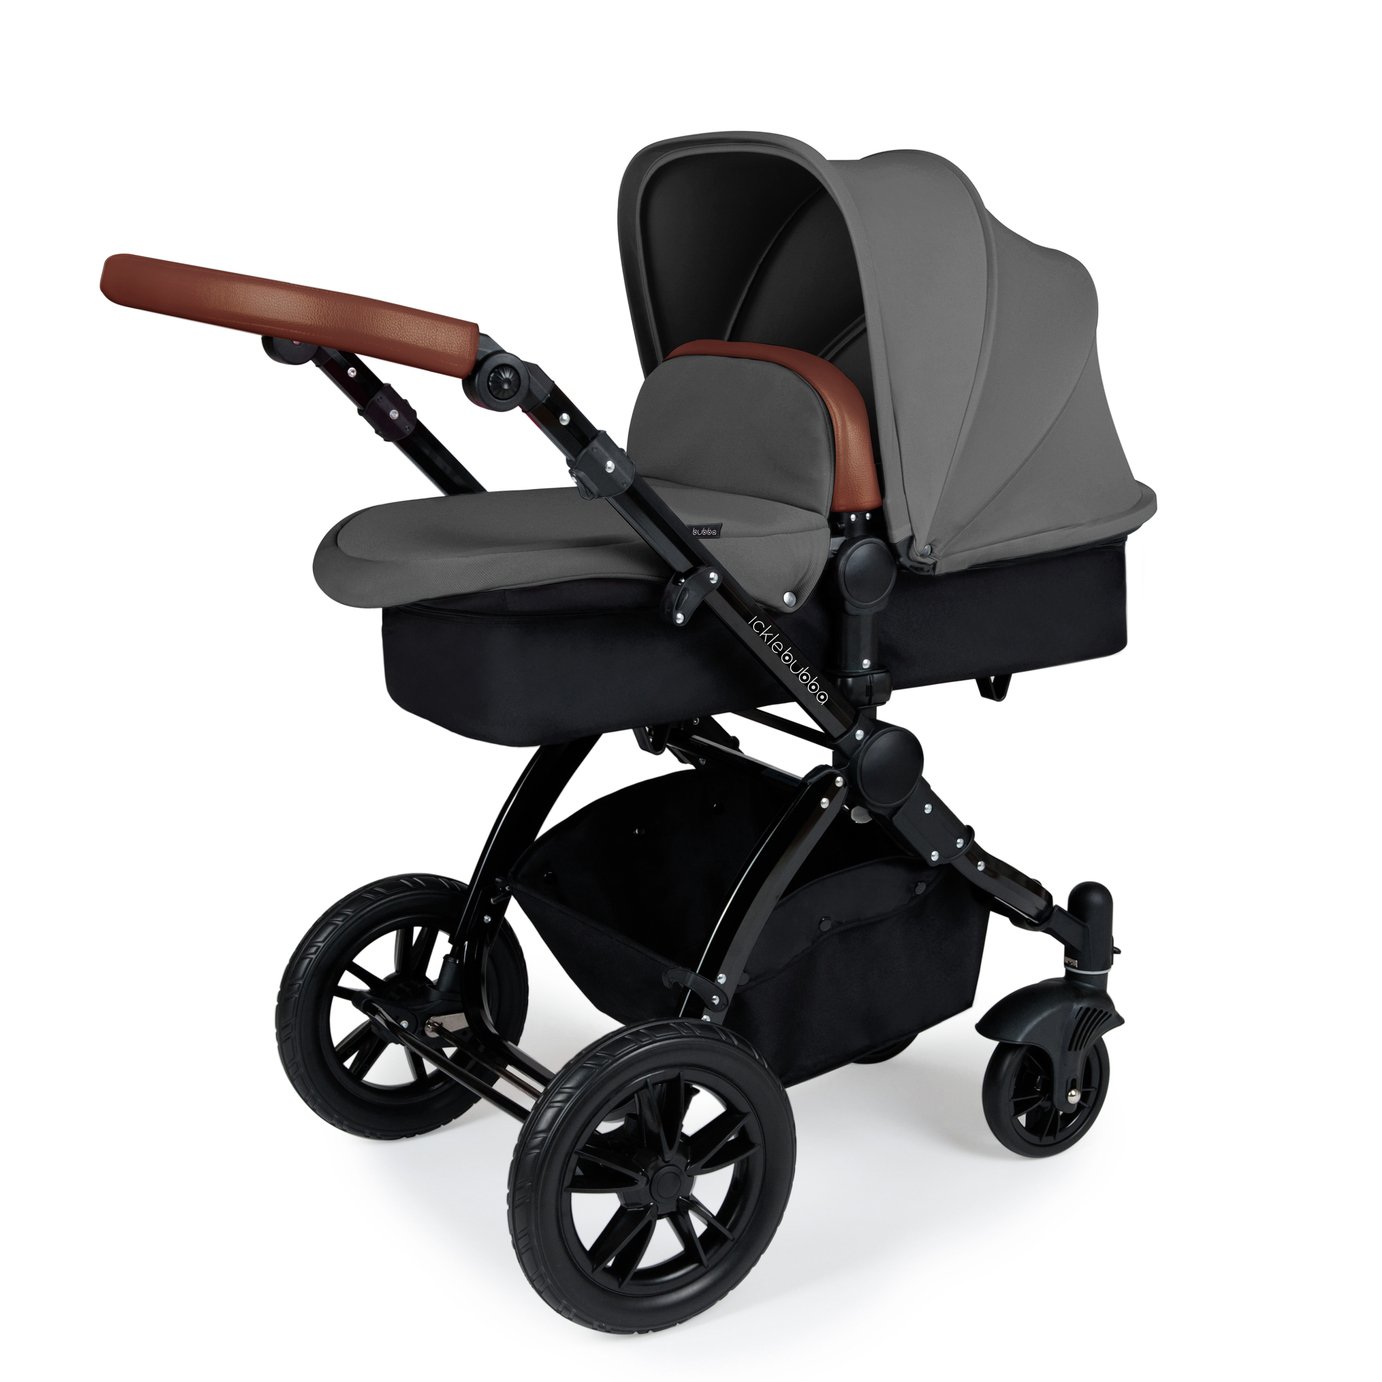 Ickle Bubba Stomp V3 ISOFIX Travel System Review